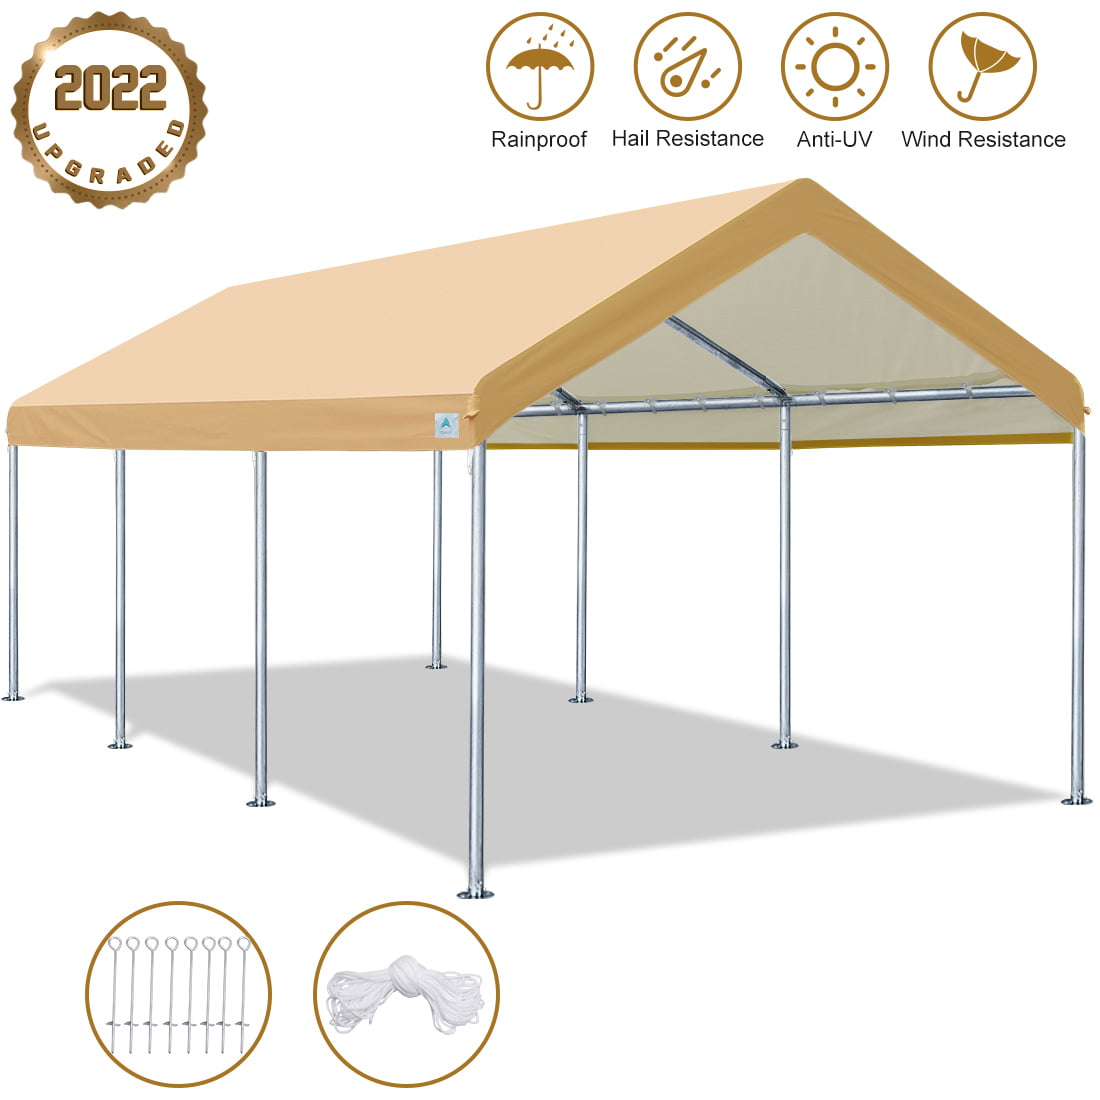 ADVANCE OUTDOOR 6x8 ft Outdoor Portable Storage Shelter Shed with 2 Roll up Zipper Doors & Vents Carport for Motorcycle Waterproof and UV Resistant Anti-Snow Portable Garage Kit Tent Gray 